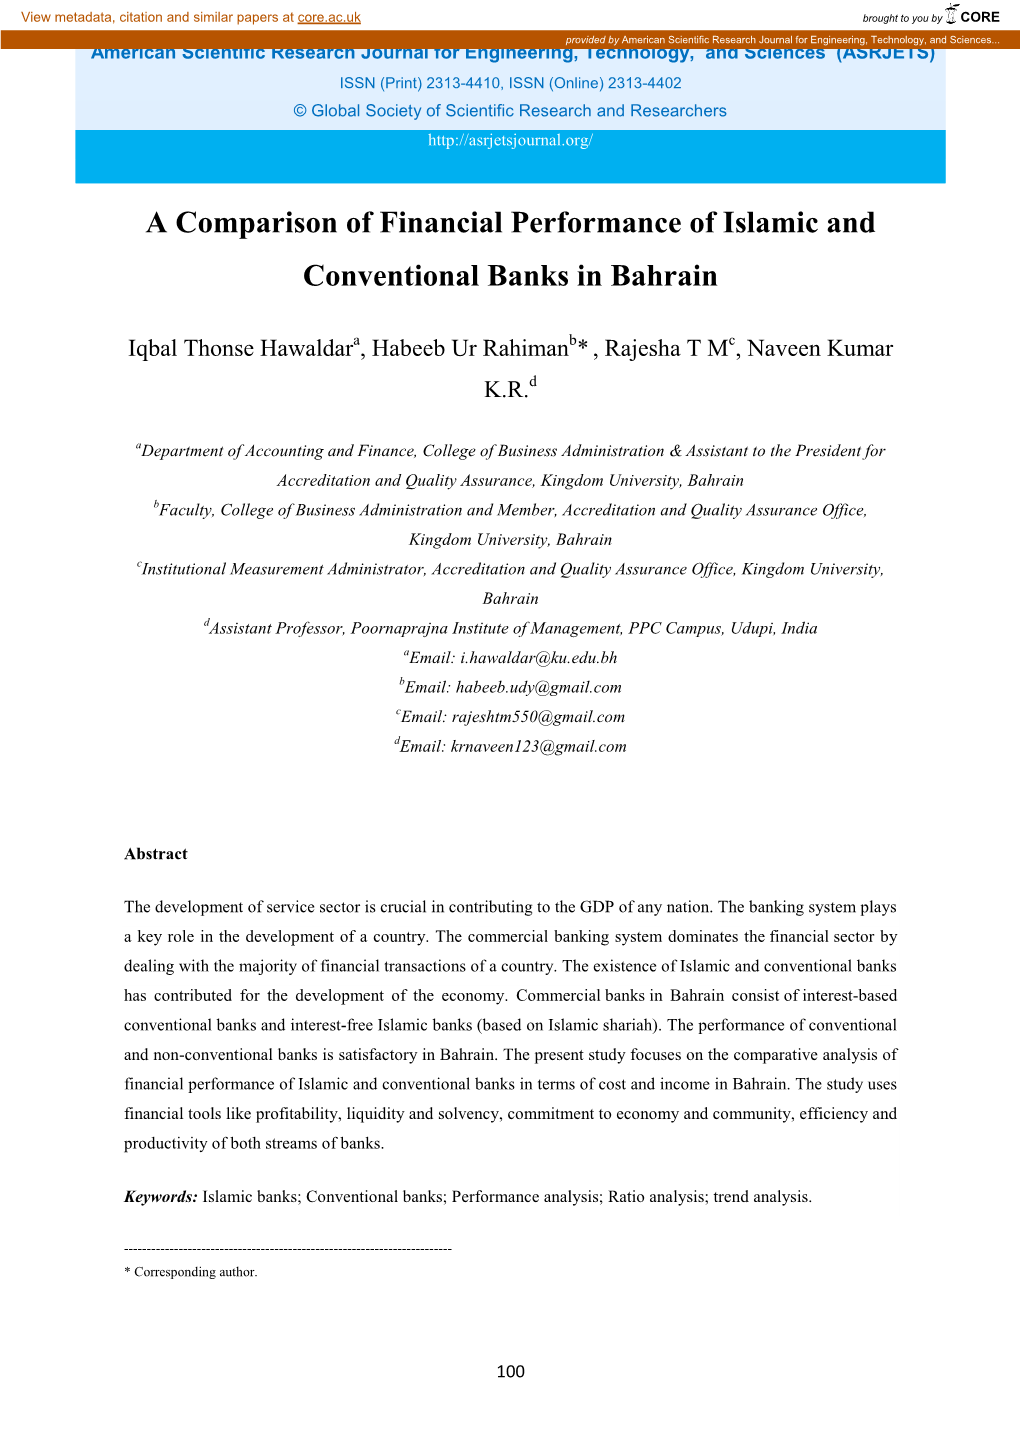 A Comparison of Financial Performance of Islamic and Conventional Banks in Bahrain